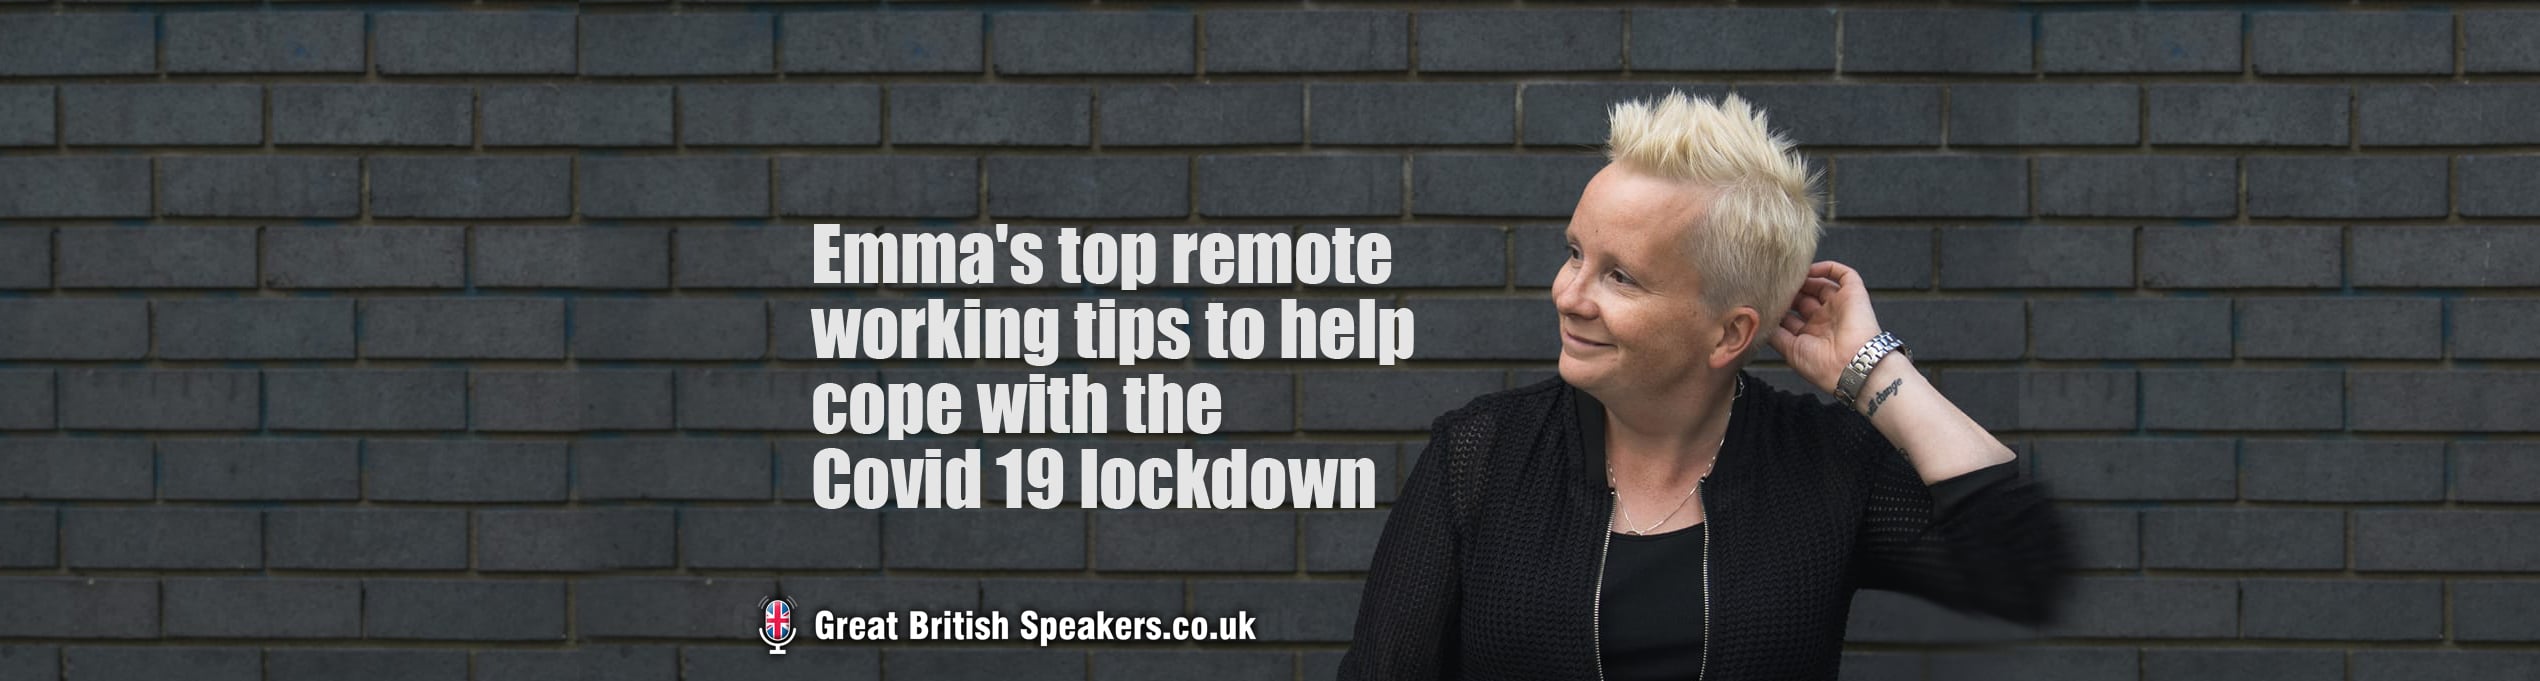 Emma-Stroud-top-remote-working-tips-beat-Covid-19-lockdown-at-Great-British-Speakers